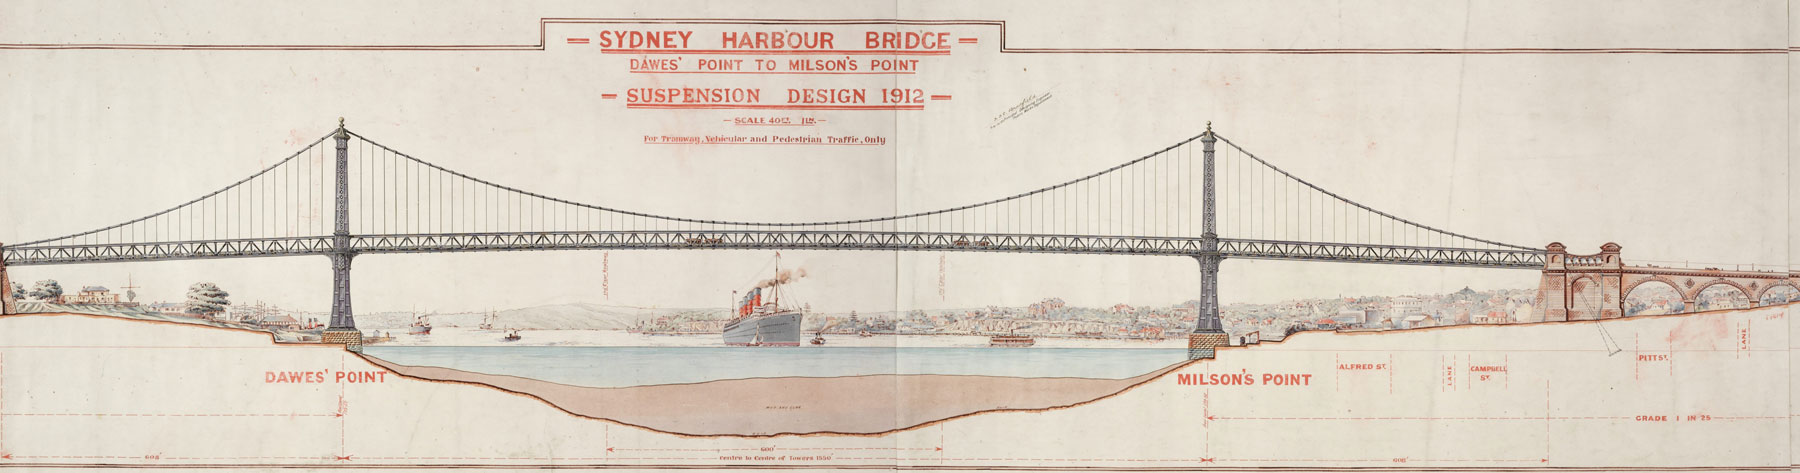 Sydney Harbour Bridge, Dawes' Point to Milson's Point, suspension design 1912 ... for tramway, vehicular and pedestrian traffic only. [and] (Cross section near tower), 1912 / J. J. C. Bradfield
